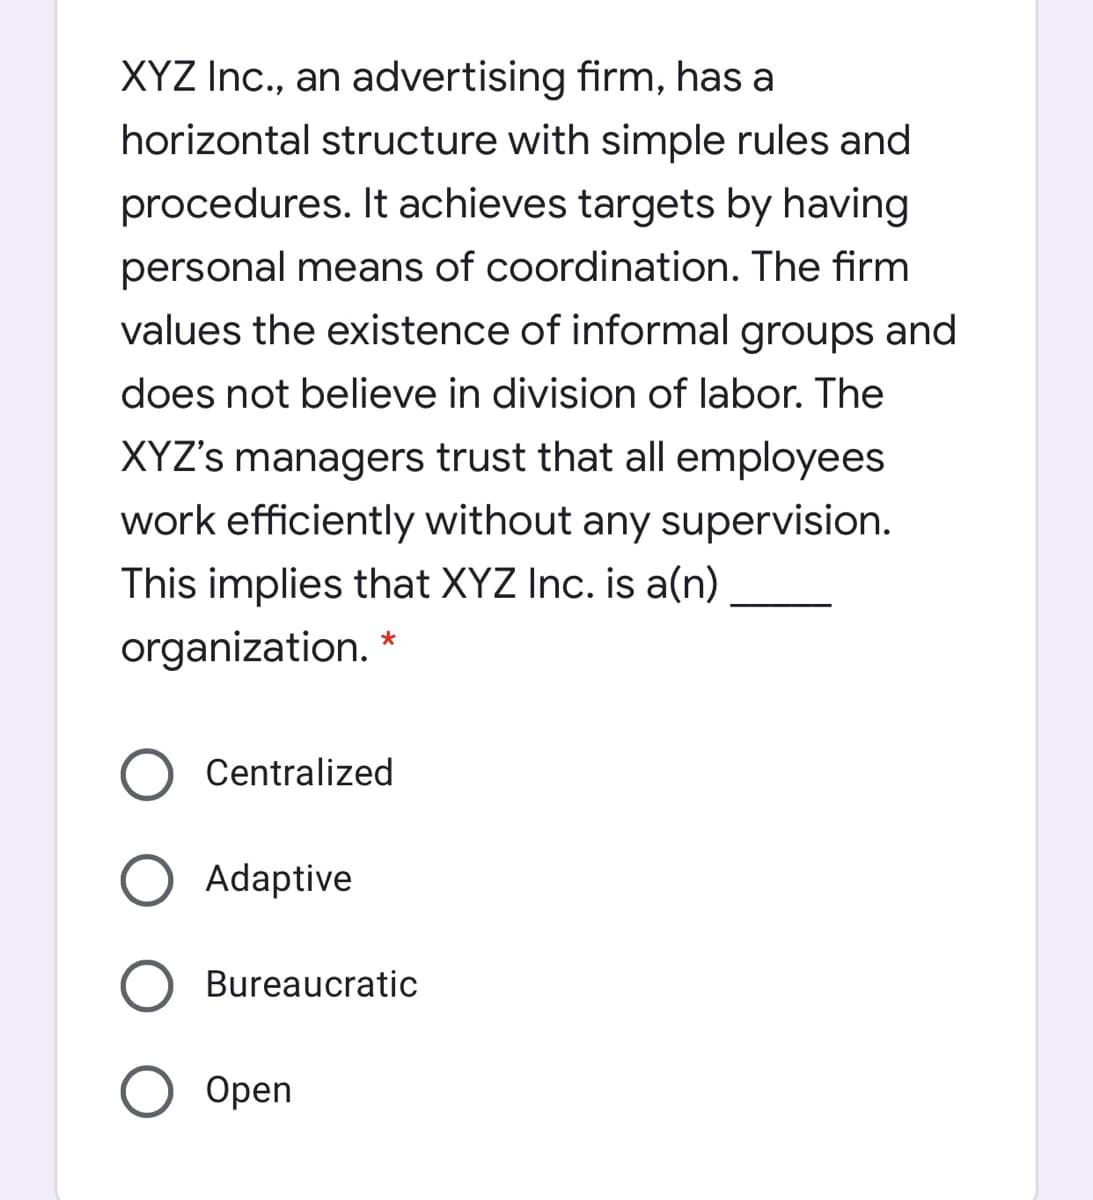 XYZ Ic., an advertising firm, has a
horizontal structure with simple rules and
procedures. It achieves targets by having
personal means of coordination. The firm
values the existence of informal groups and
does not believe in division of labor. The
XYZ's managers trust that all employees
work efficiently without any supervision.
This implies that XYZ Inc. is a(n)
organization.
Centralized
Adaptive
Bureaucratic
Open
